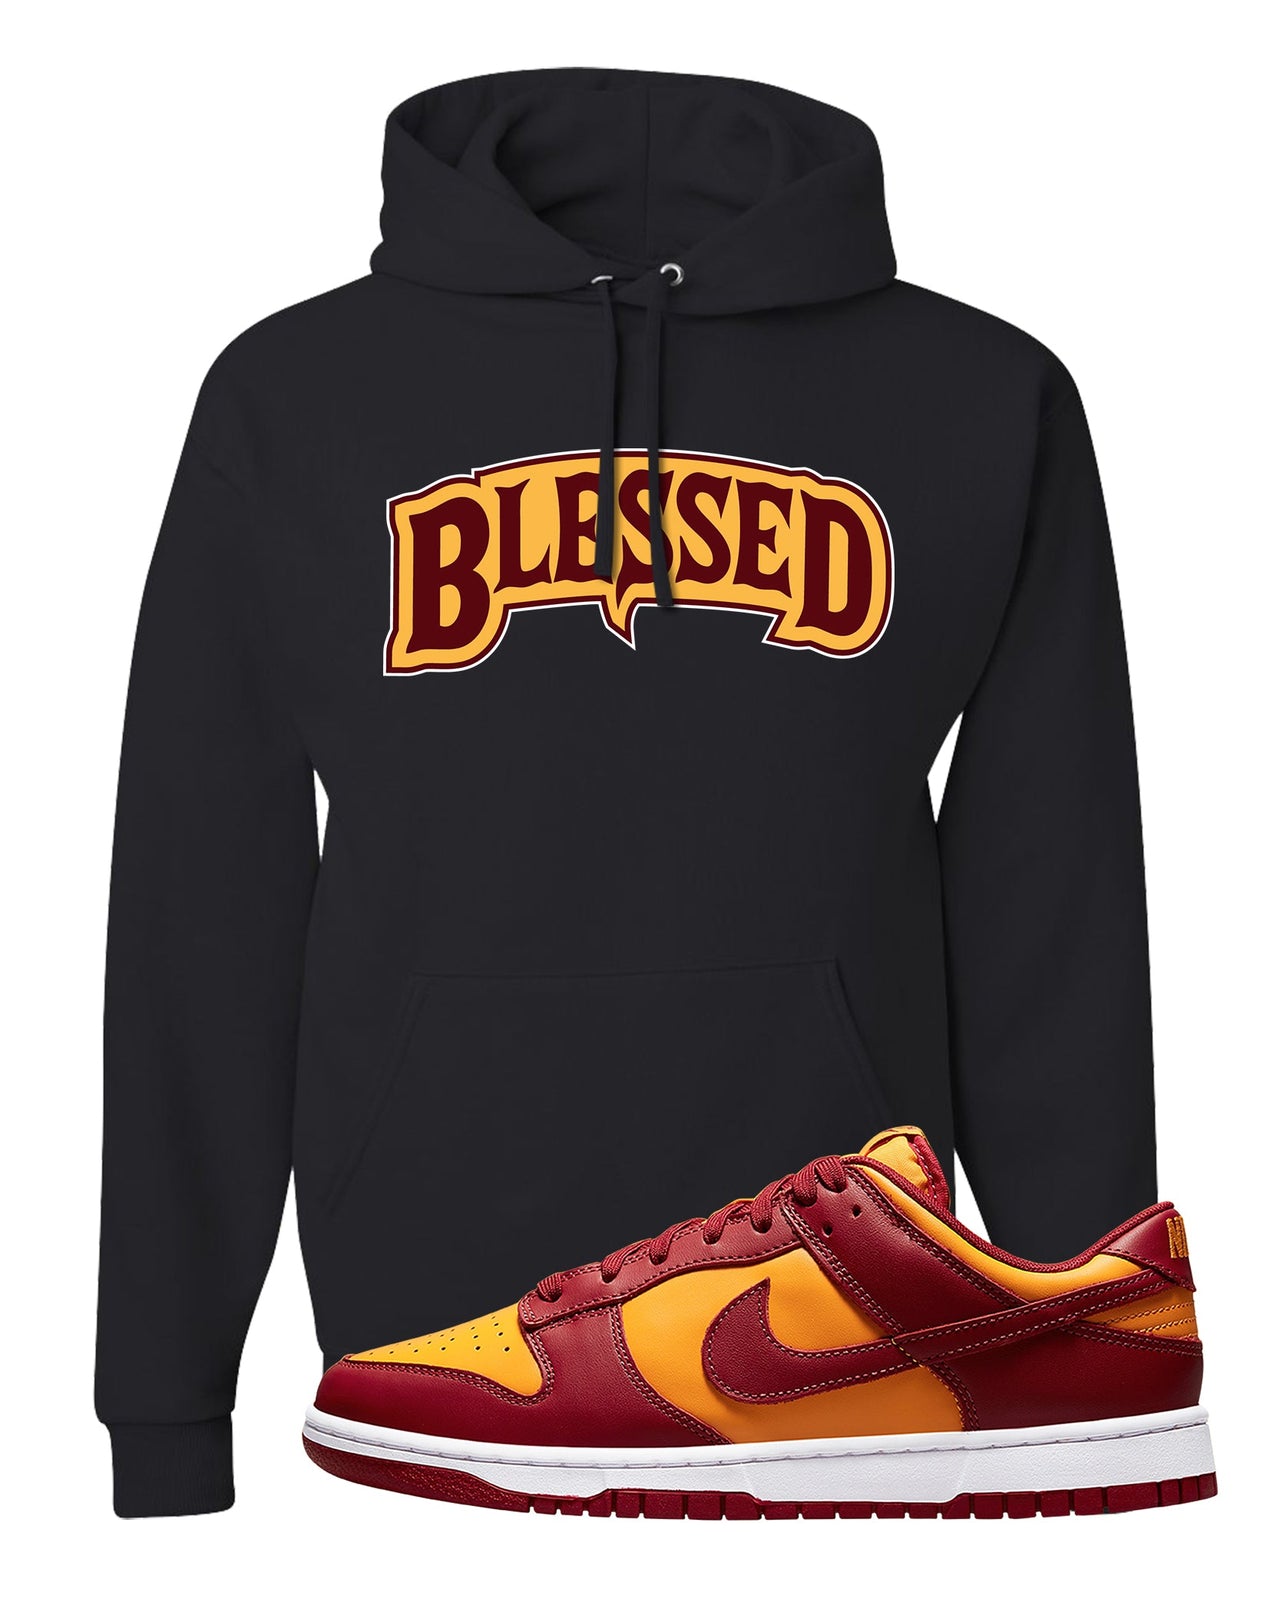 Midas Gold Low Dunks Hoodie | Blessed Arch, Black